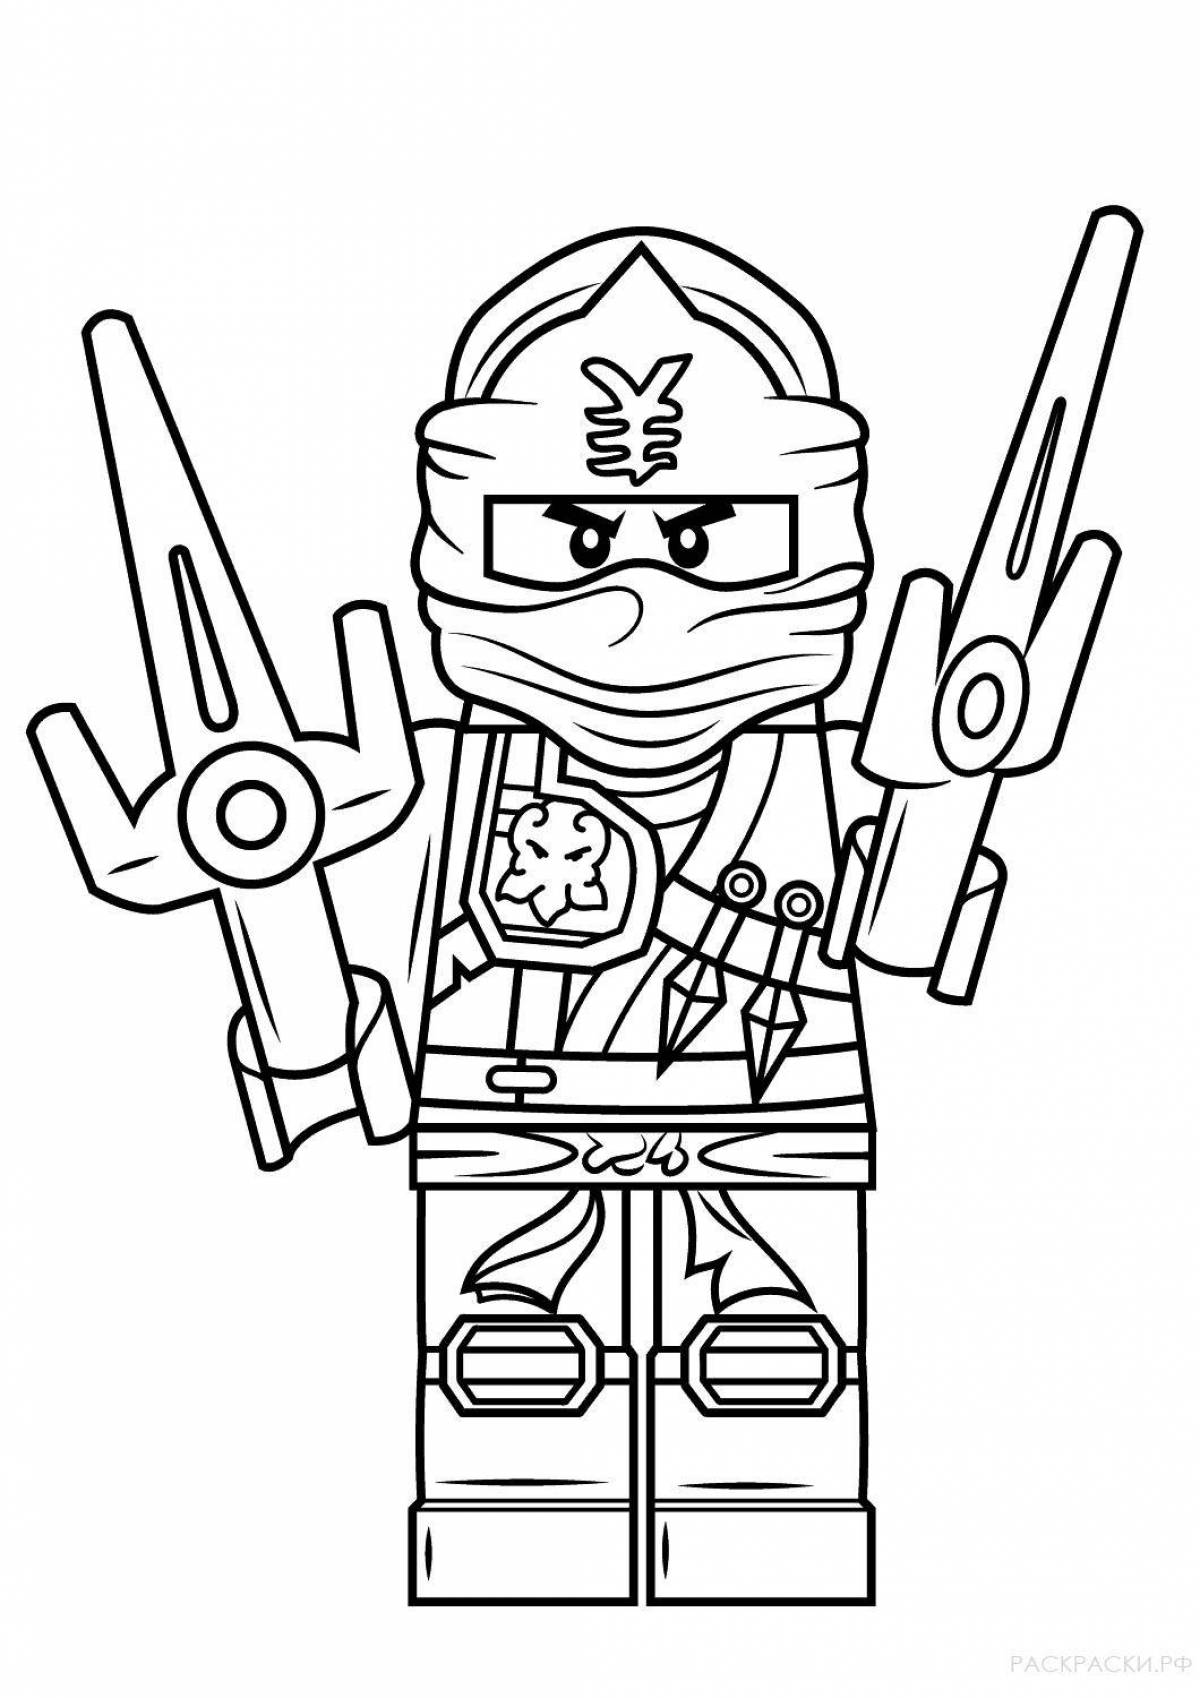 Awesome lego ninjago movie coloring page